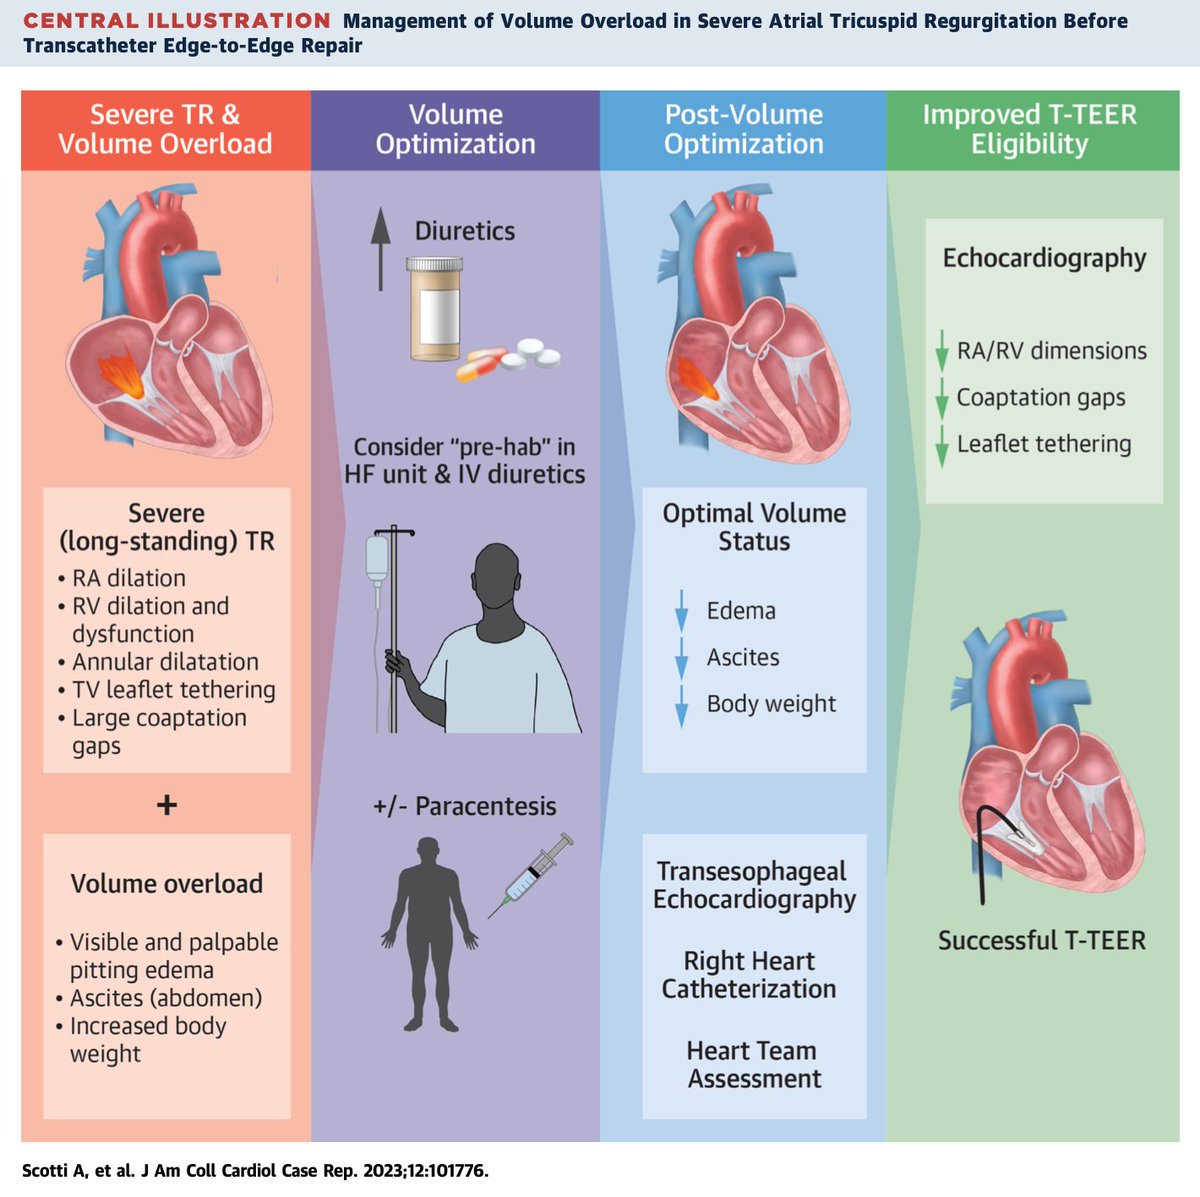 ✨Management of Volume Overload and Severe Atrial TR on @JACCJournals

Reversing Vol Overload can:
🎯Improve pt functional status
🎯Improve eligibility for TTVI
🎯Avoid repeating invasive exams

🌐 jacc.org/doi/10.1016/j.…

@azeemlatib @CurioJonathan
@MonteHeart #PCRTricuspid